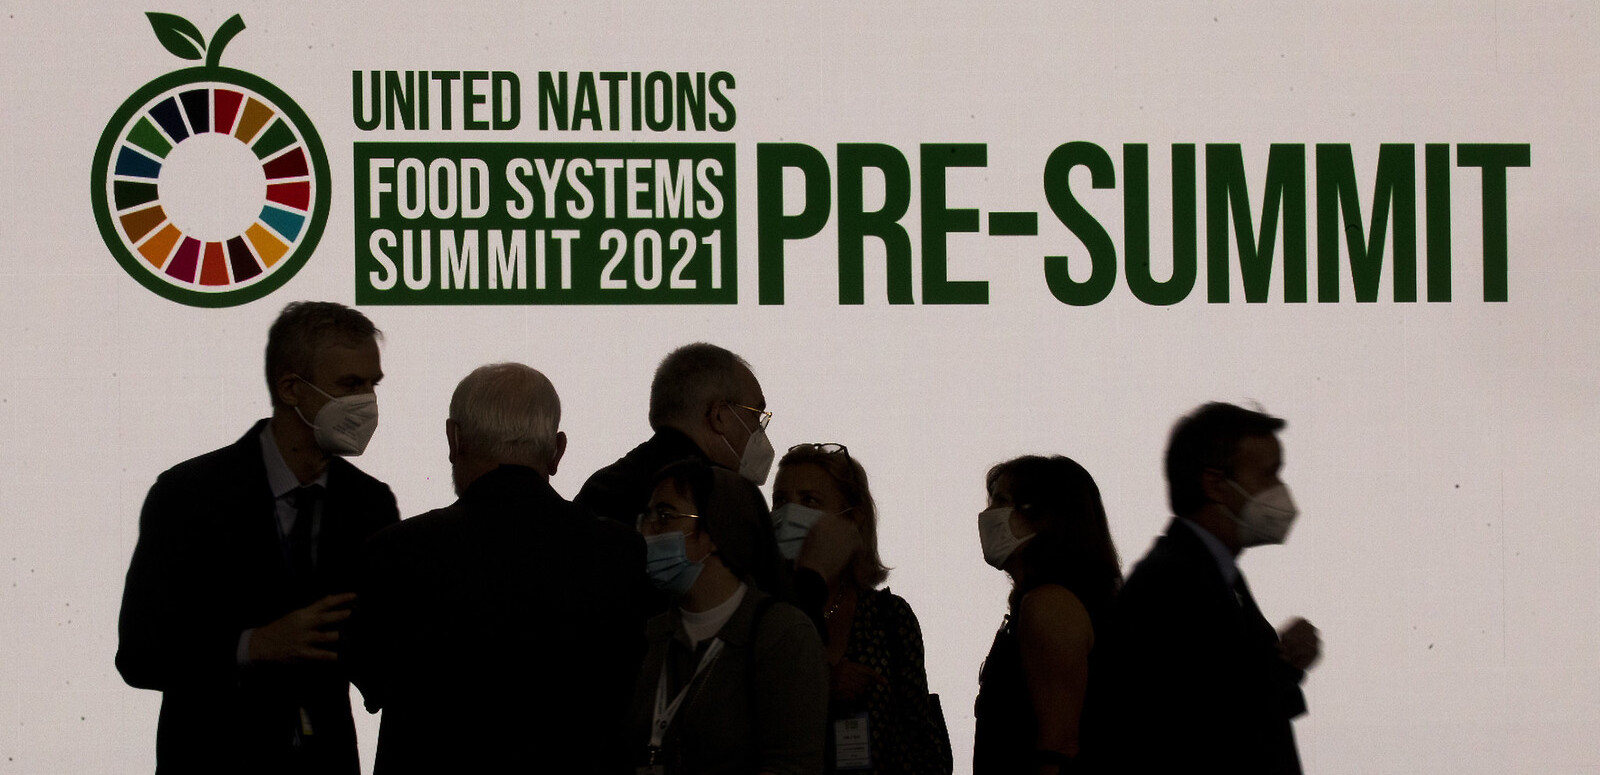 Meat industry pushes factory farming at UN food systems summit Unearthed